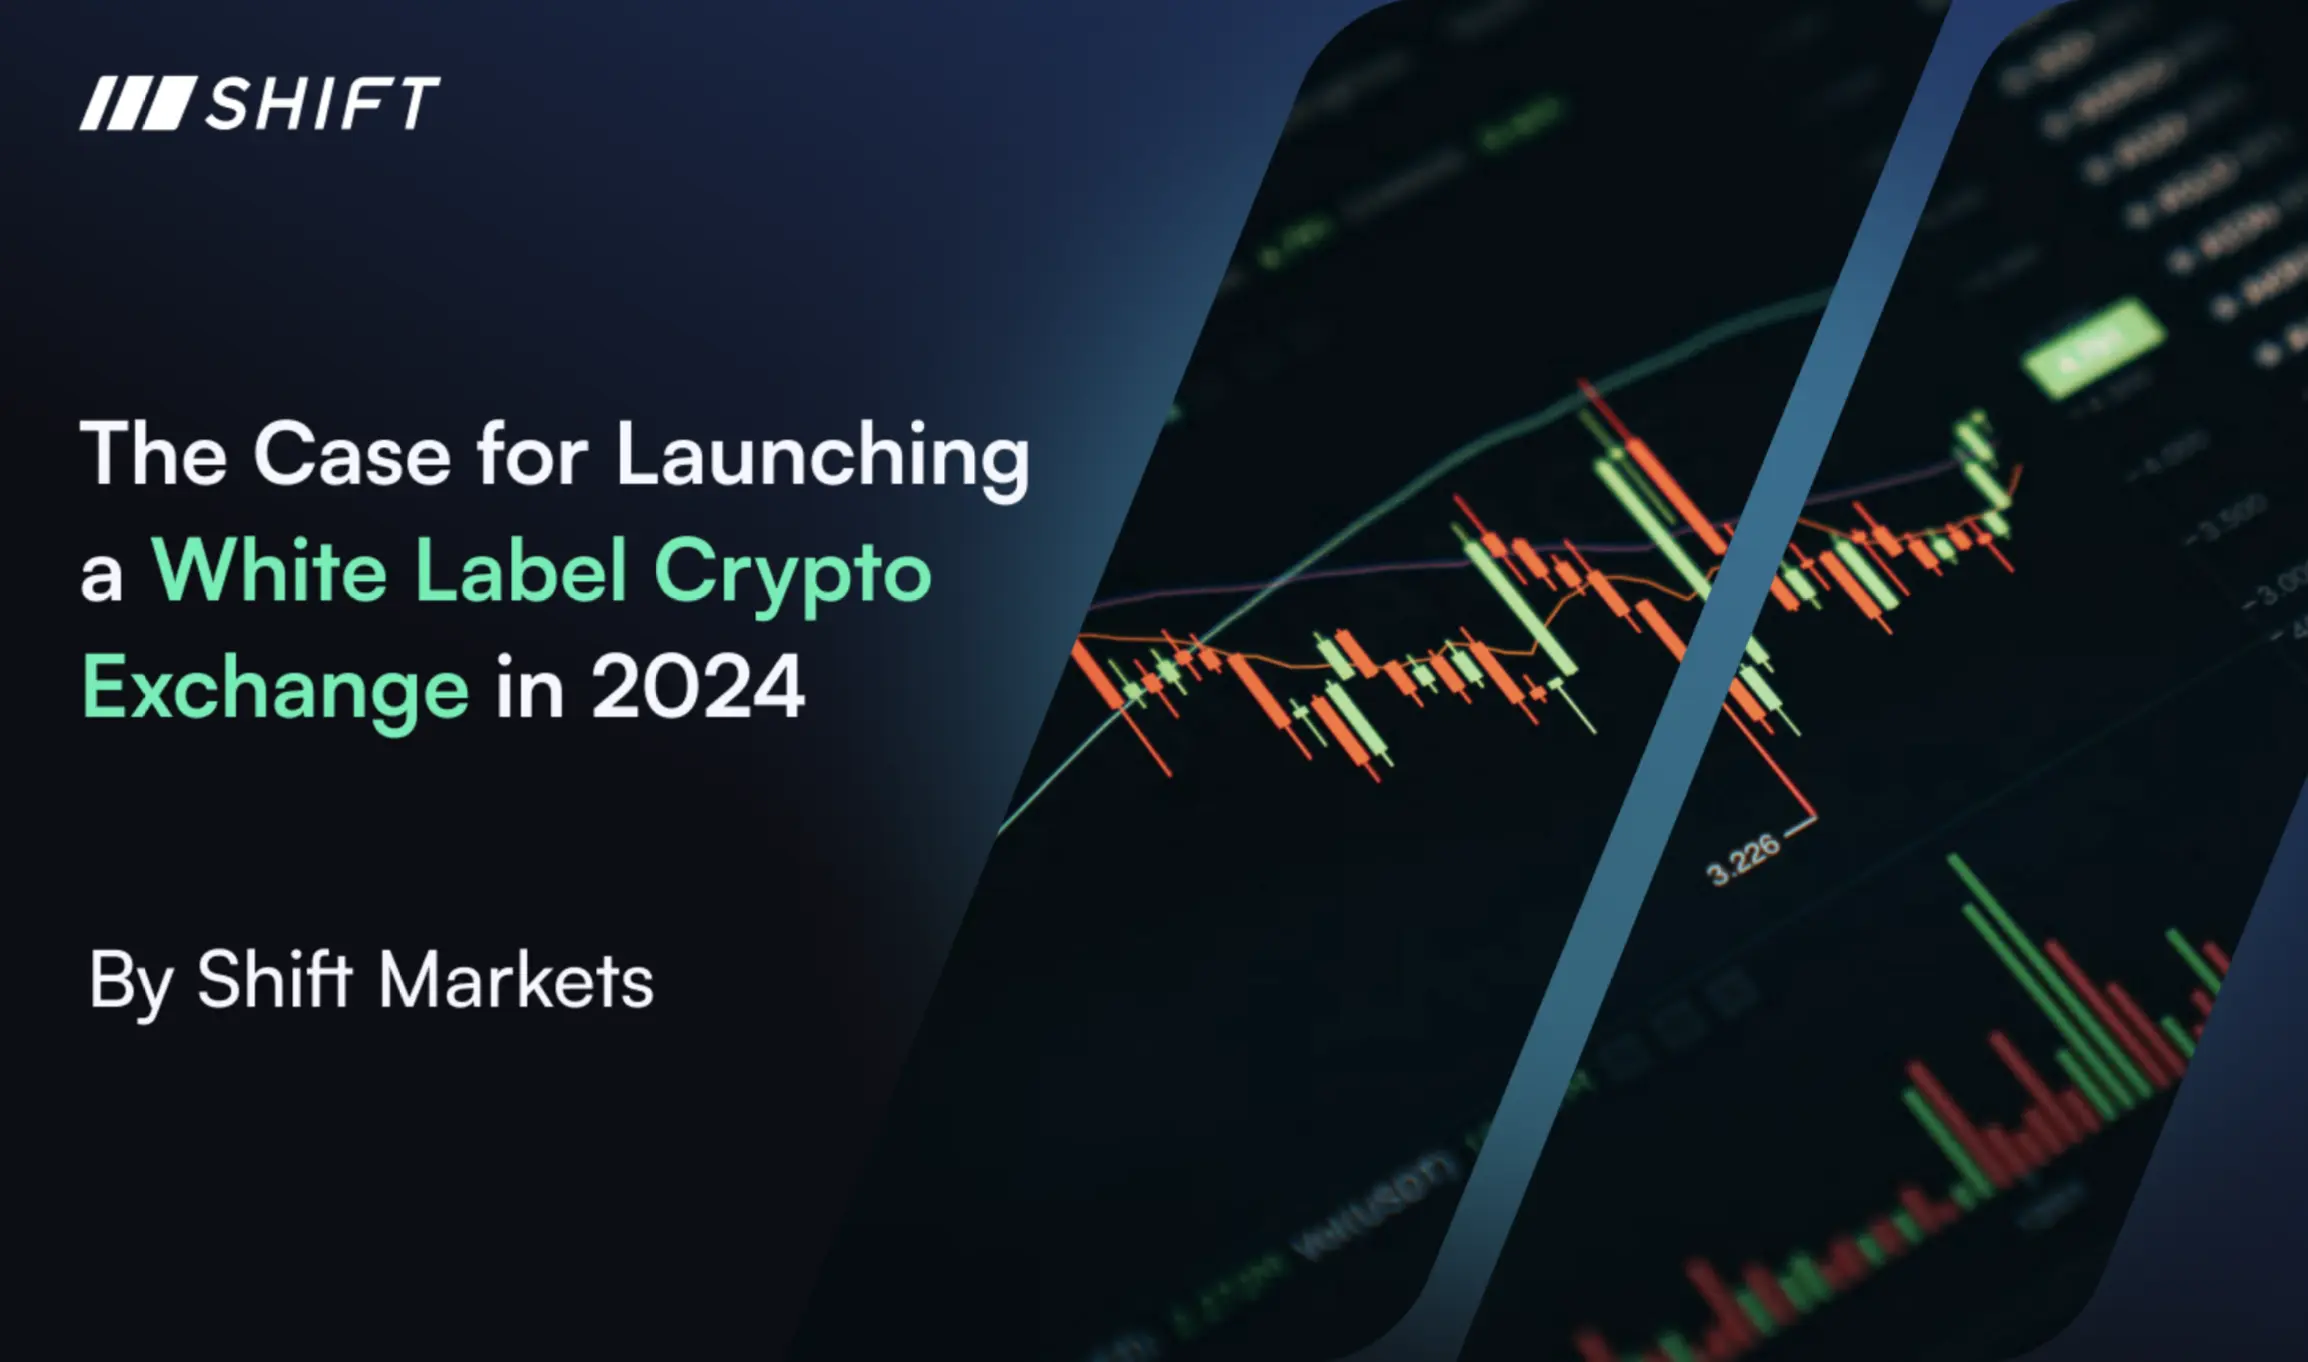 Learn why launching a crypto exchange in 2024 is key with Shift Markets.